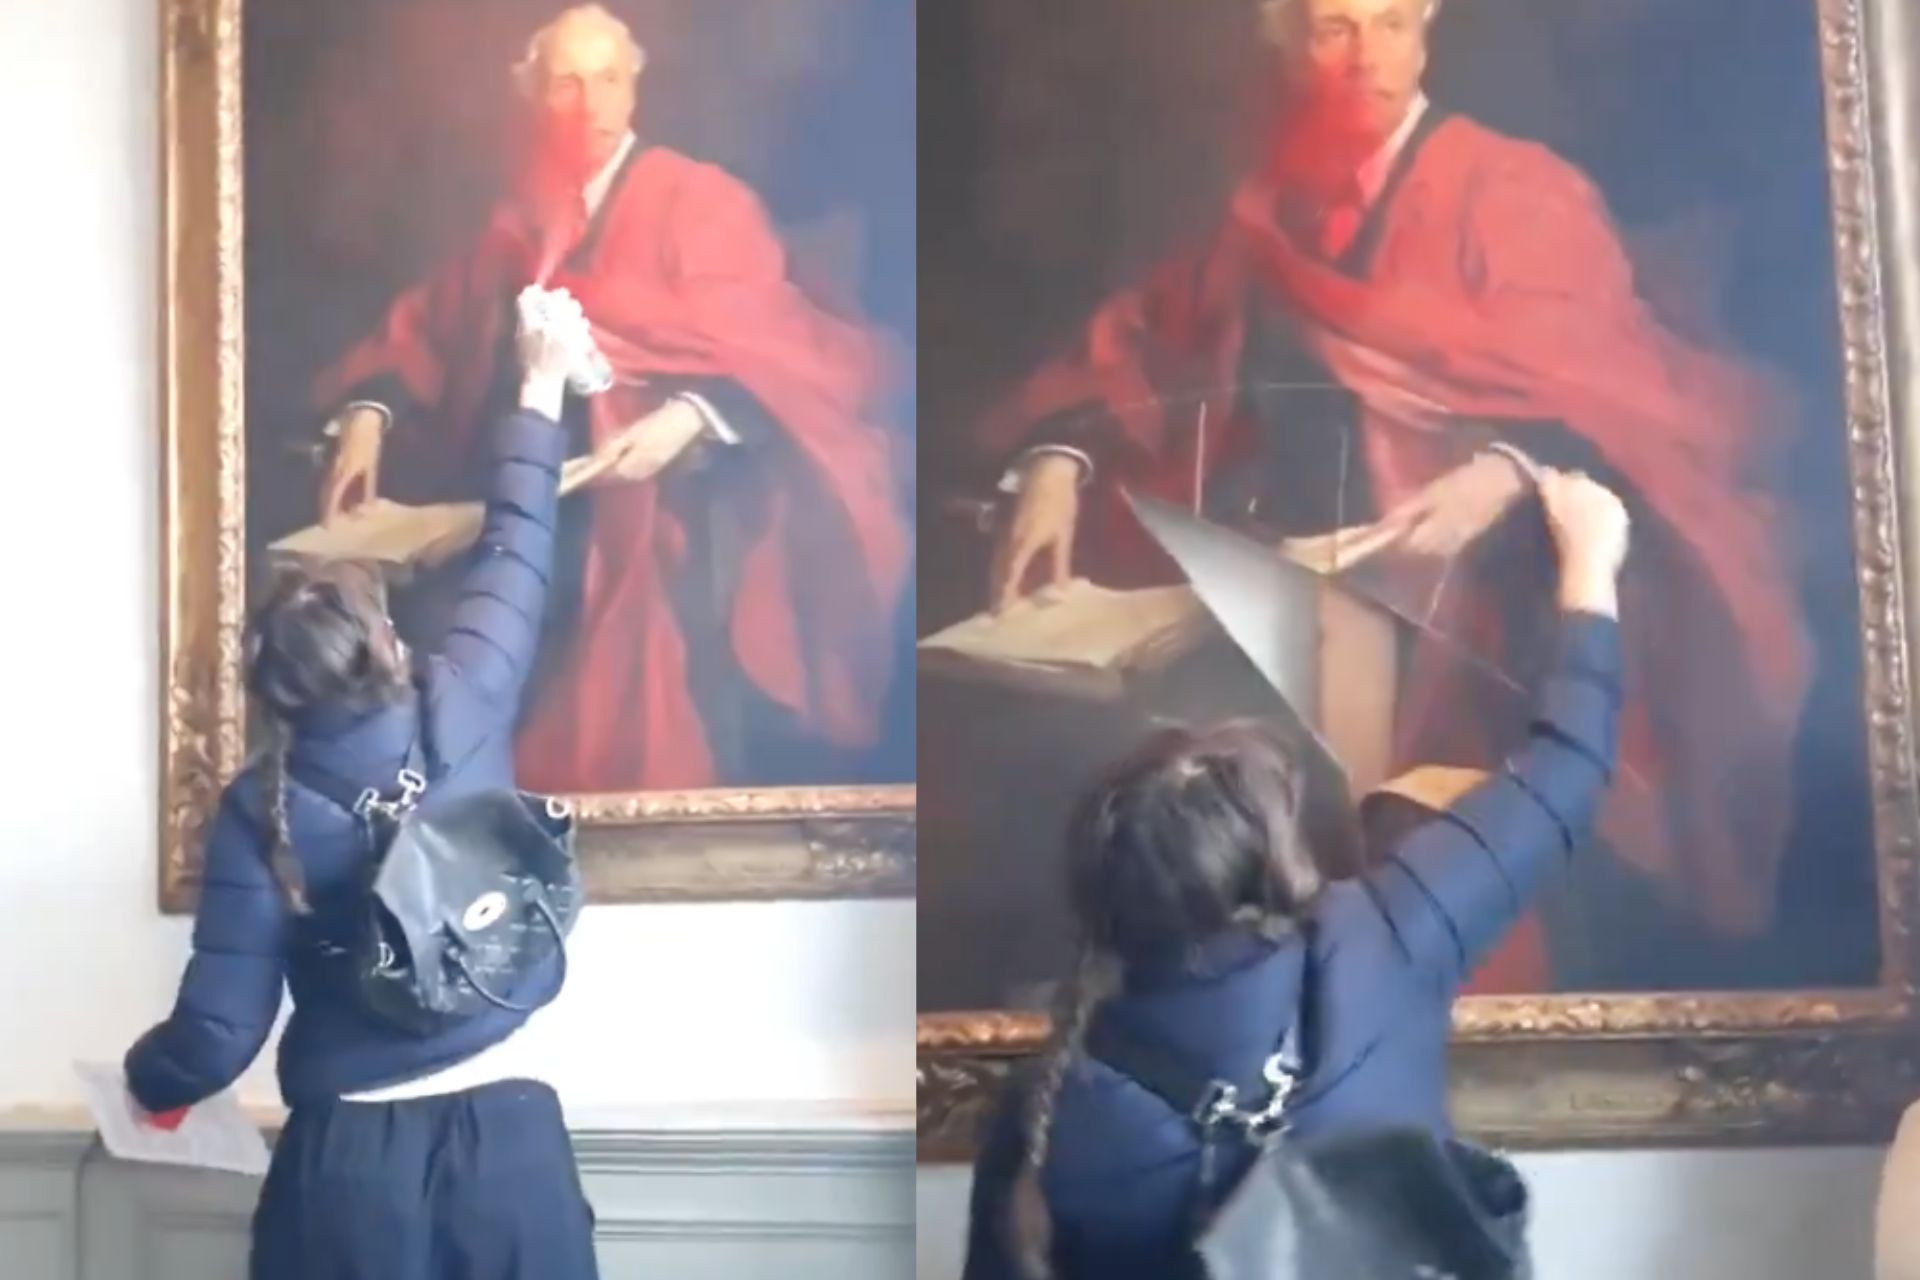 A masked Palestinian activist destroys a historic British painting